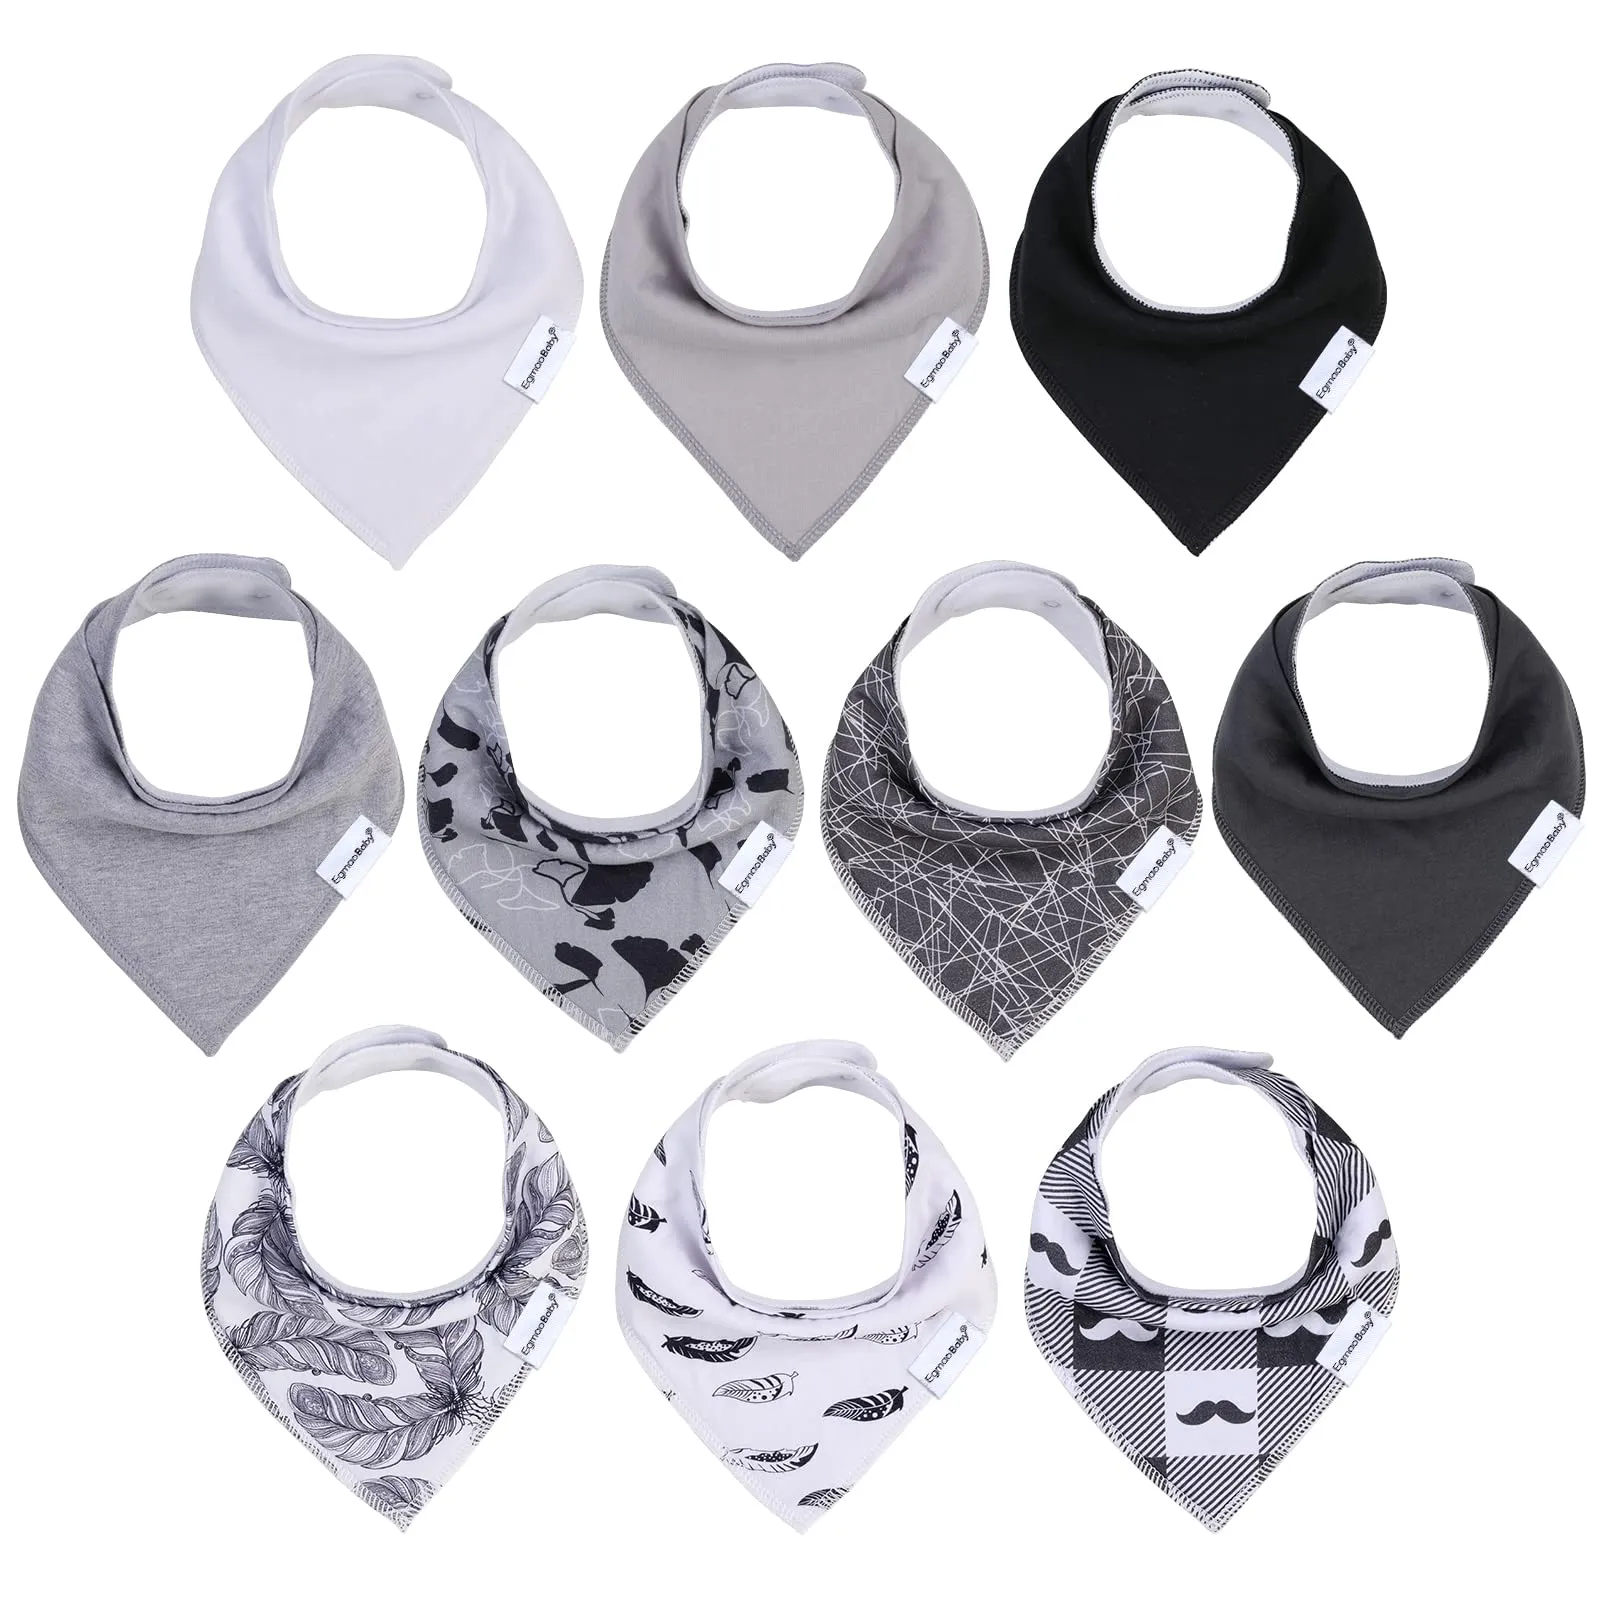 muslin baby bibs baby bandana drool bibs 100% cotton for unisex boys girls 10 solid colors set for teething and drooling